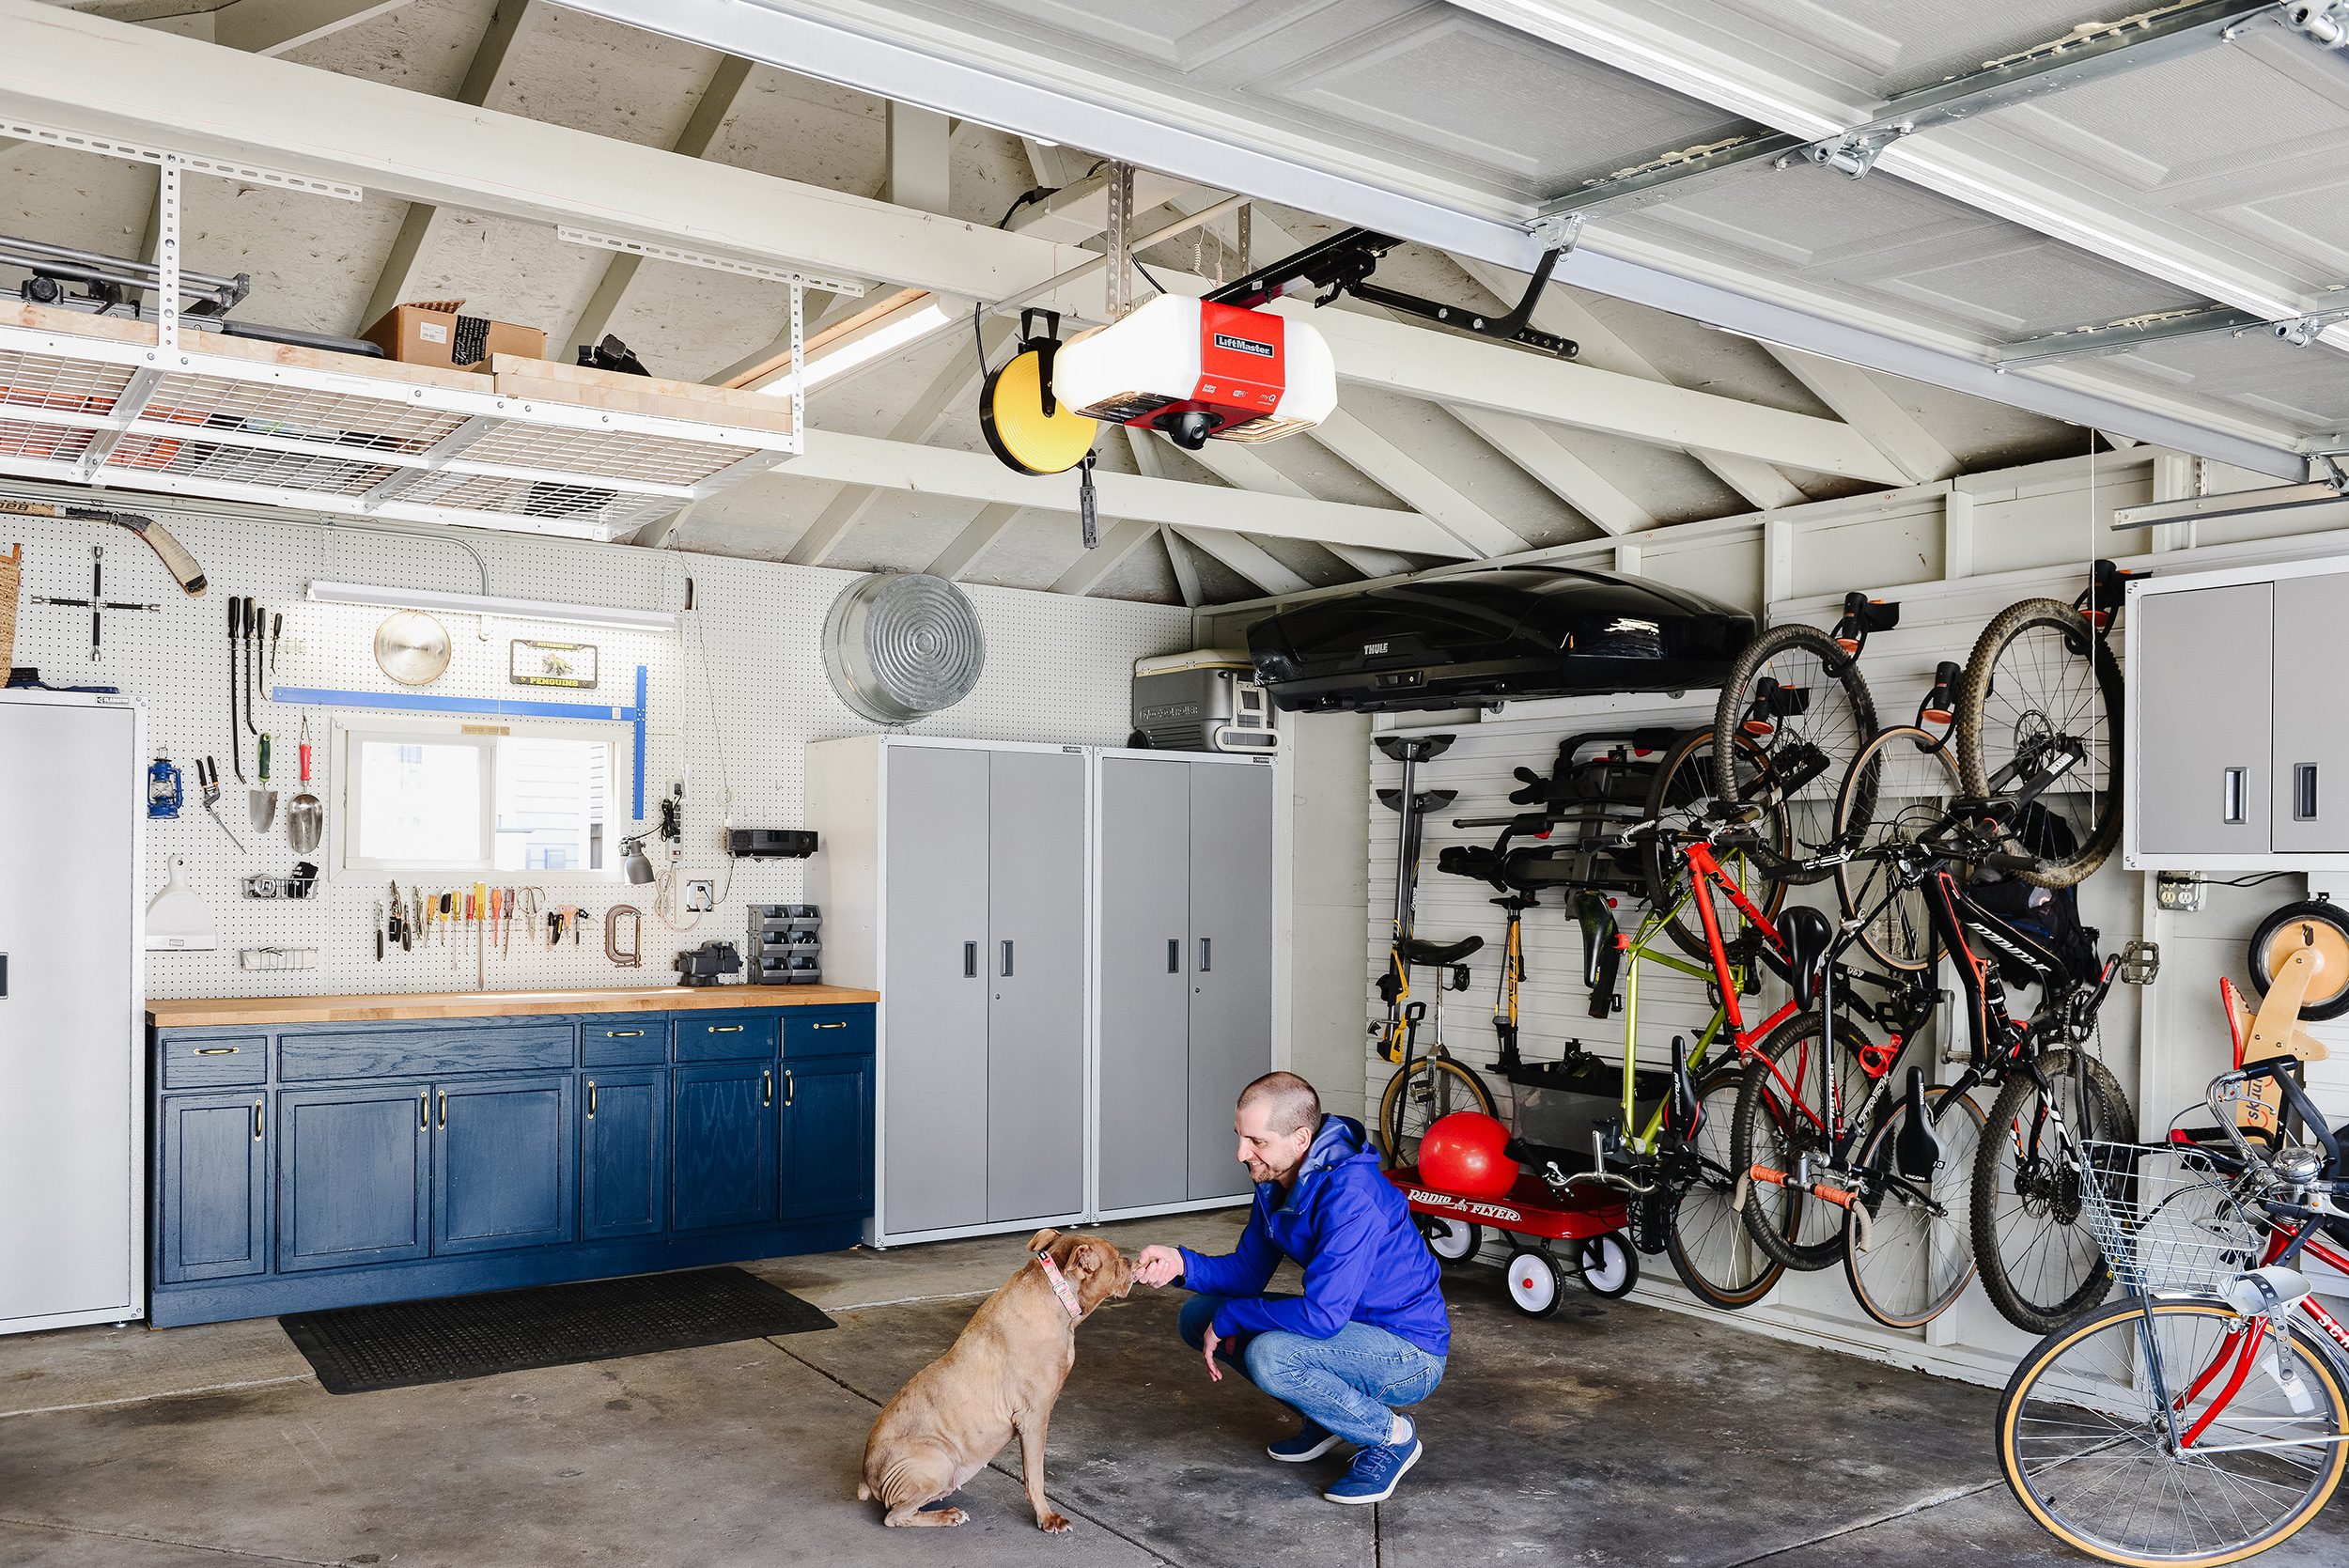 A man in a blue windbreaker shakes with a brown pit bull dog in a tidy garage with bikes hanging on the wall // via yellow brick home 